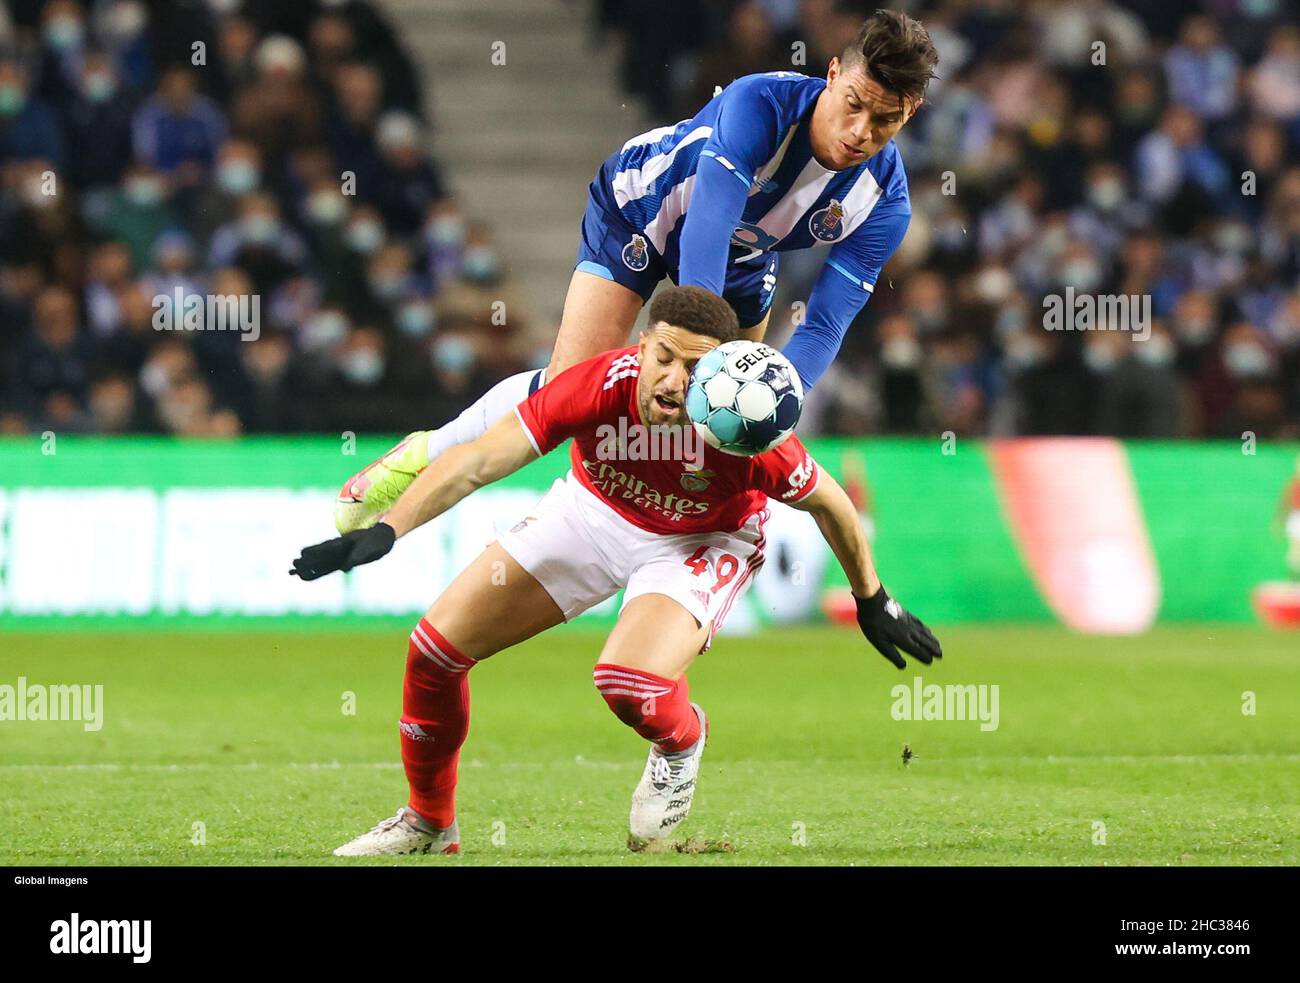 Porto, 12/23/2021 - FC Porto hosted SL Benfica tonight at EstÃdio do Dragão  in a game of the 5th round of the Portuguese Cup for the 2021/2022 season.  Uribe and Taarabt (Ivan